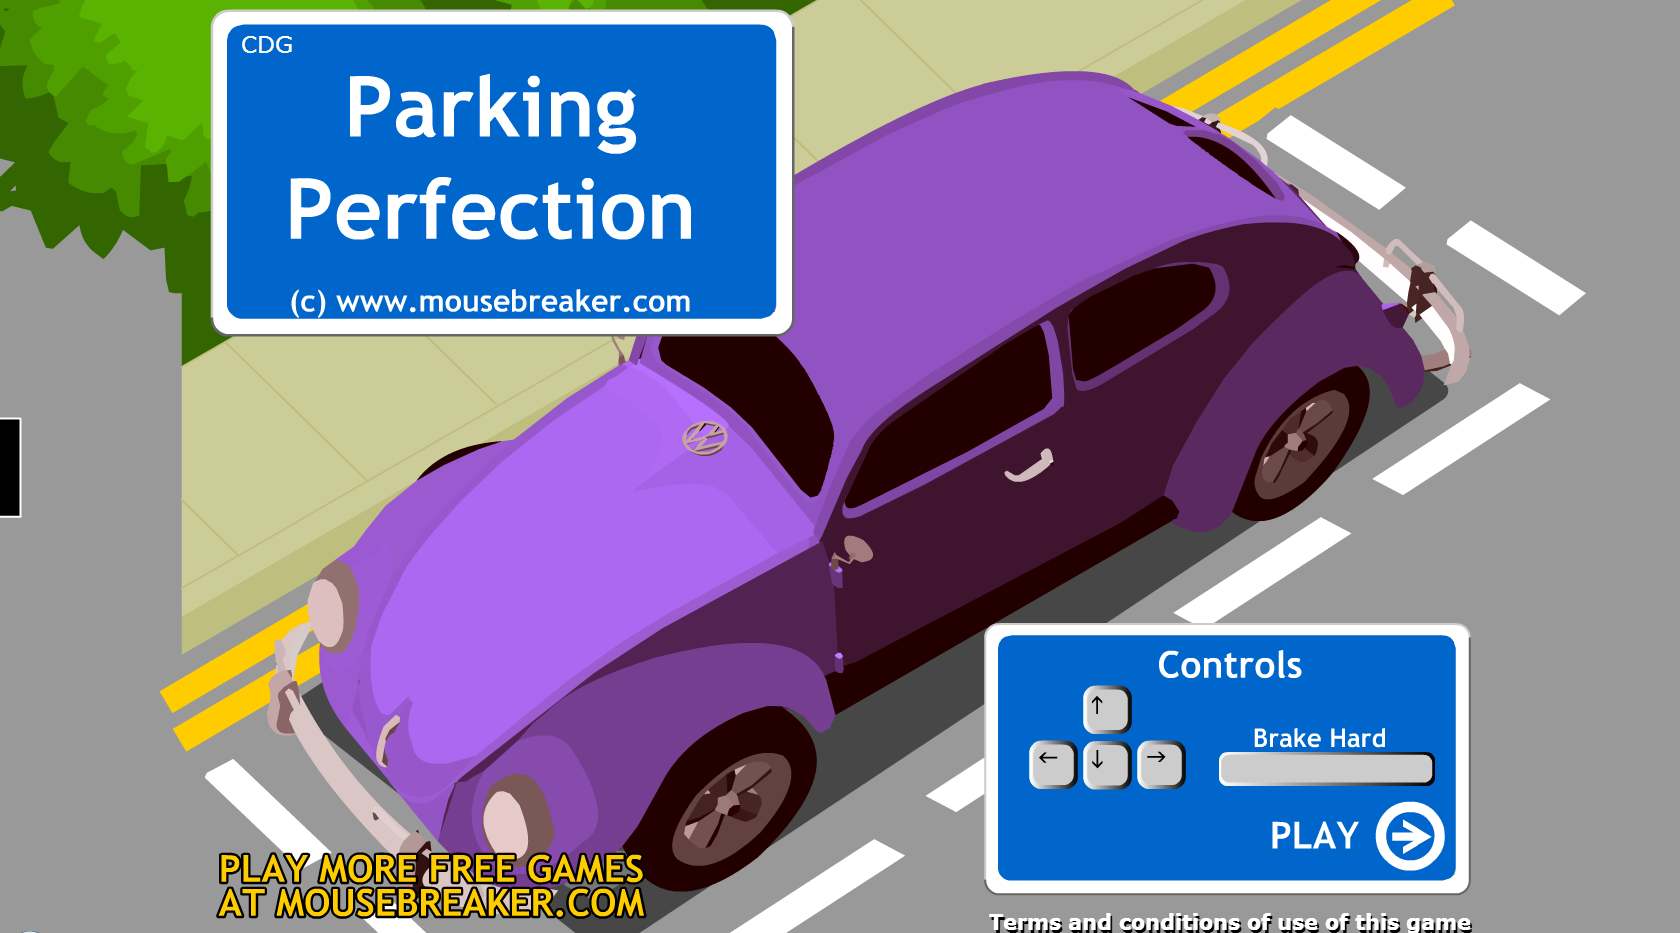 Parking Perfection with VW BeetleParking Perfection  with VW BeetleParking Perfection with VW BeetleParking Perfection with VW BeetleParking Perfection  with VW BeetleParking Perfection  with VW BeetleParking Perfection with VW BeetleParking Perfection  with VW Beetle